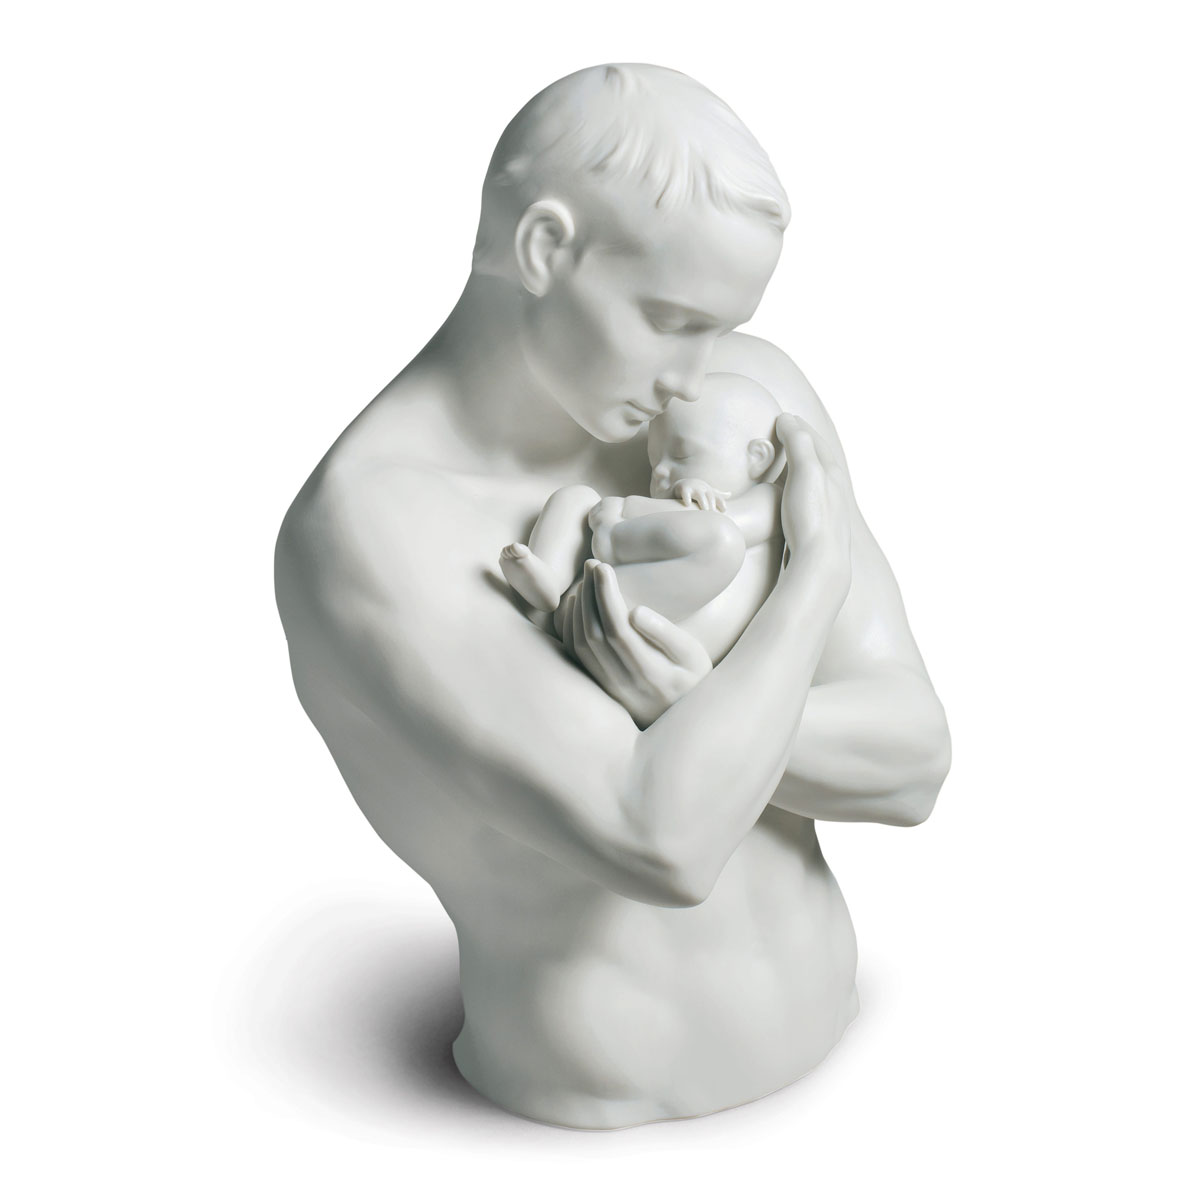 Lladro Classic Sculpture, Paternal Protection Figurine